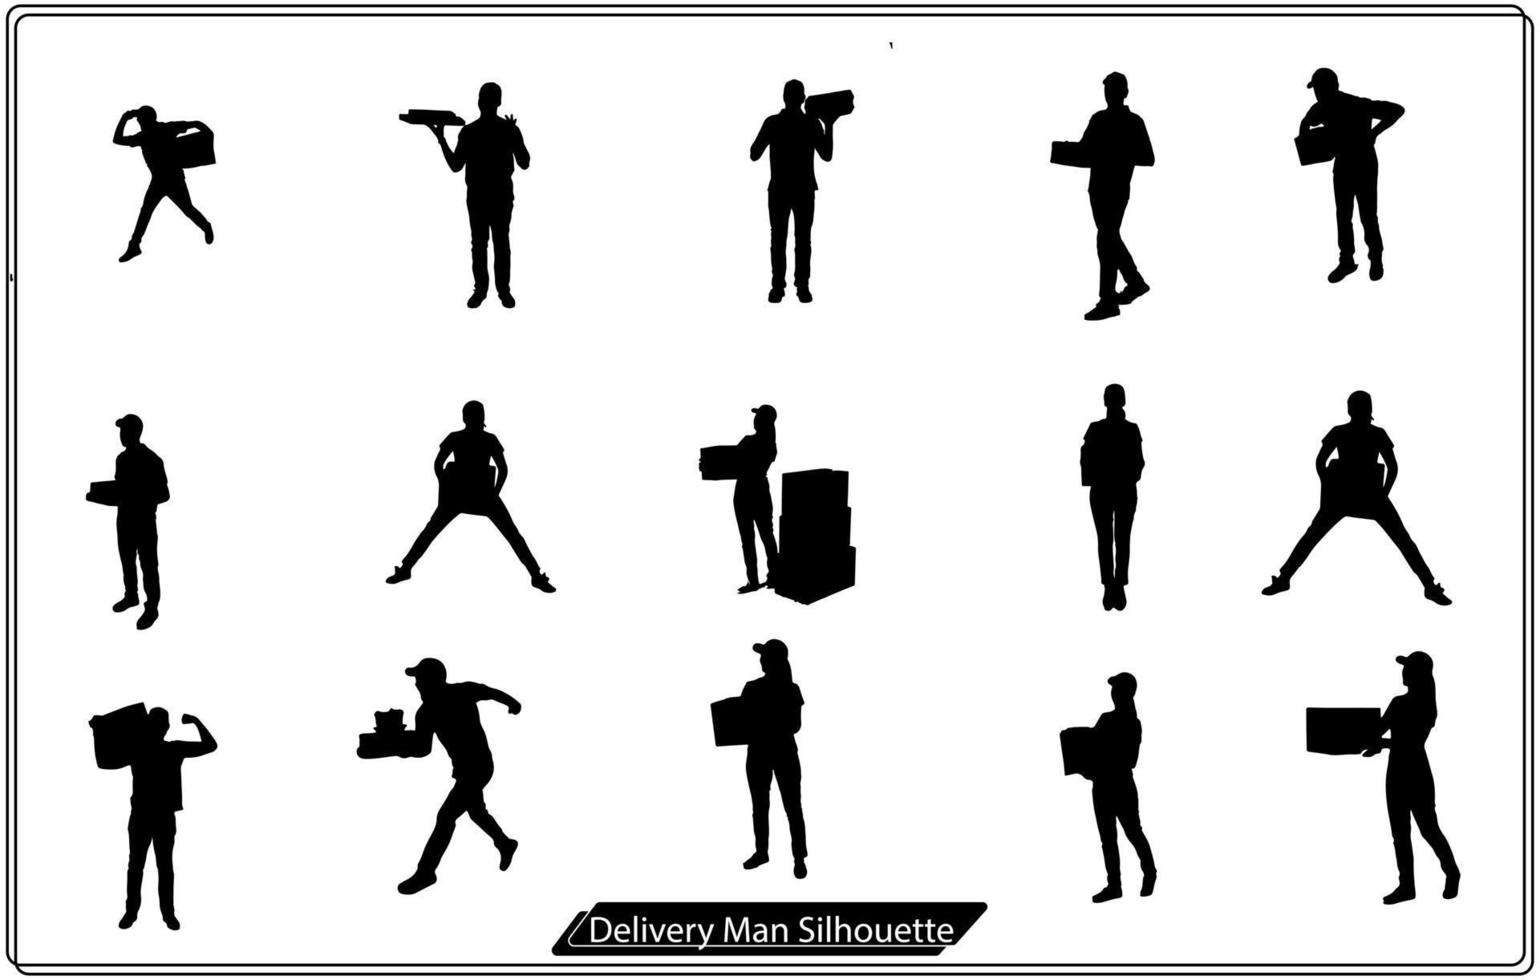 Courier Service Silhouettes and Delivery man vector